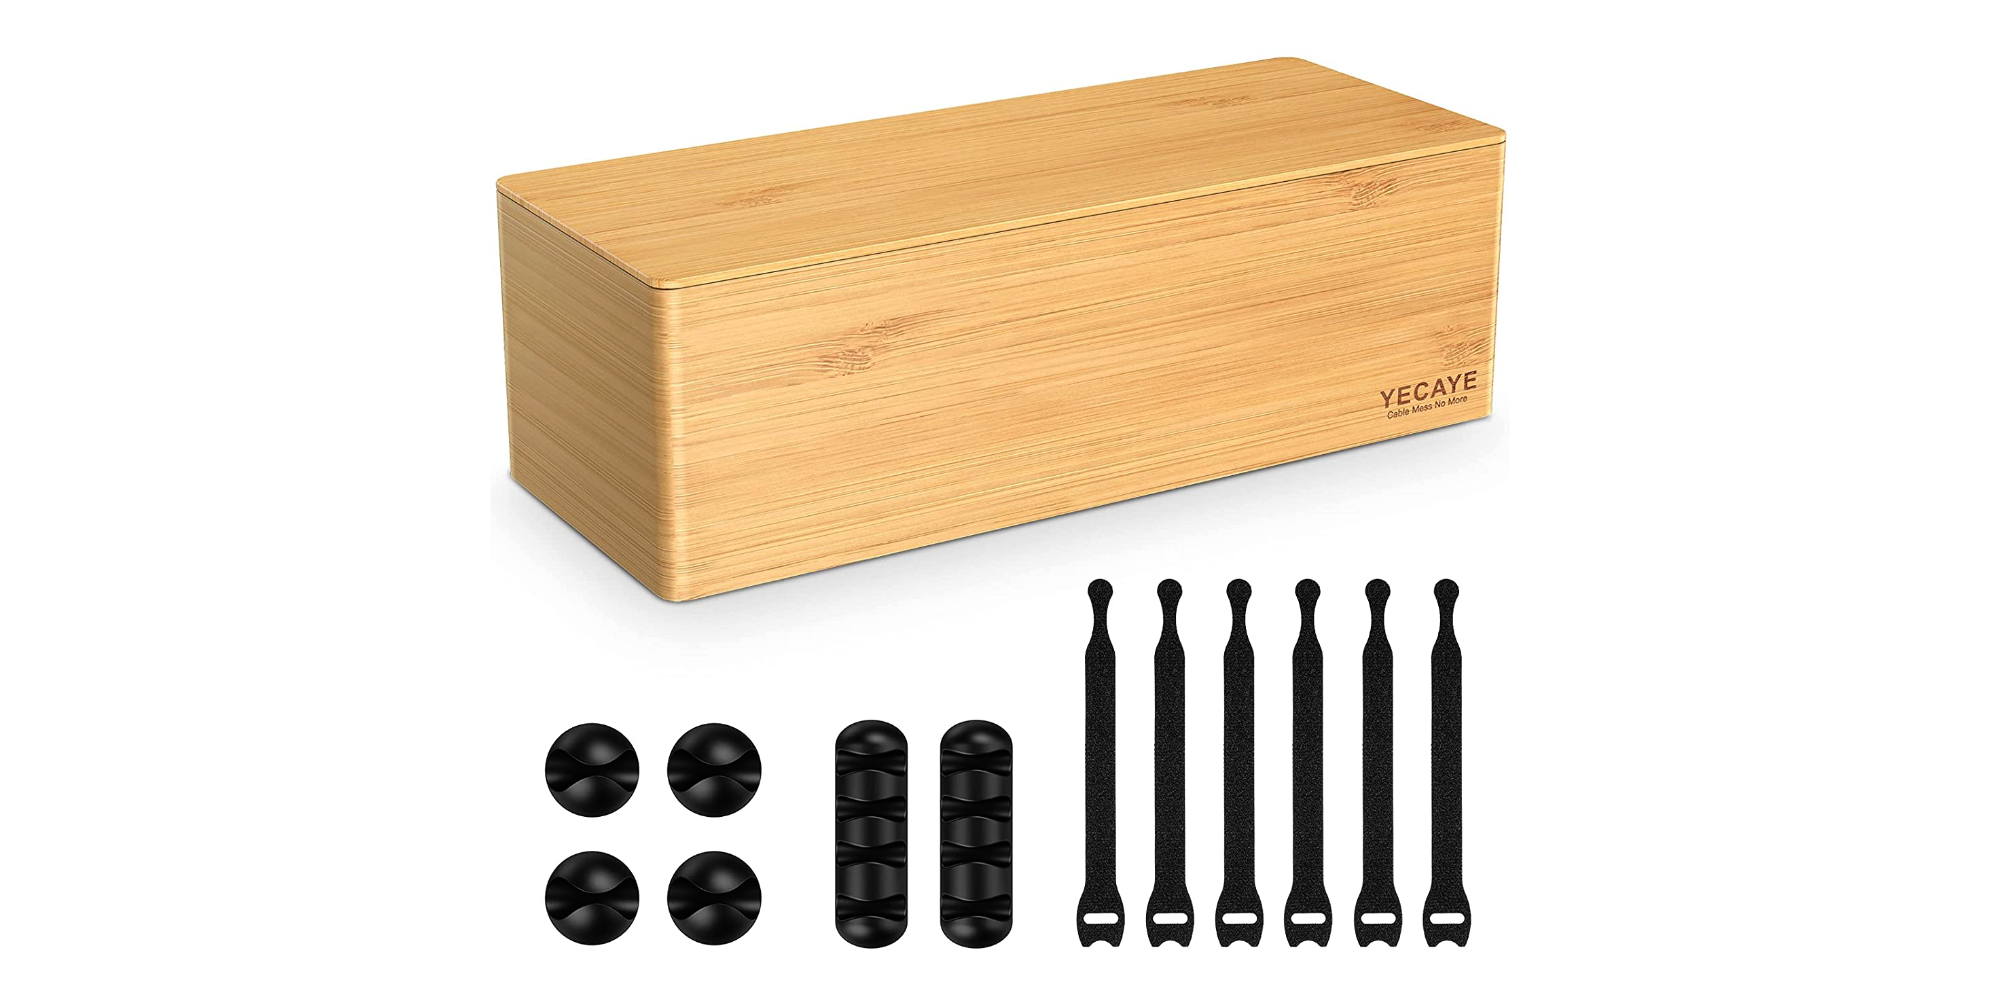 https://9to5toys.com/wp-content/uploads/sites/5/2021/11/Yecaye-Bamboo-Cable-Management-Box-Kit.jpg